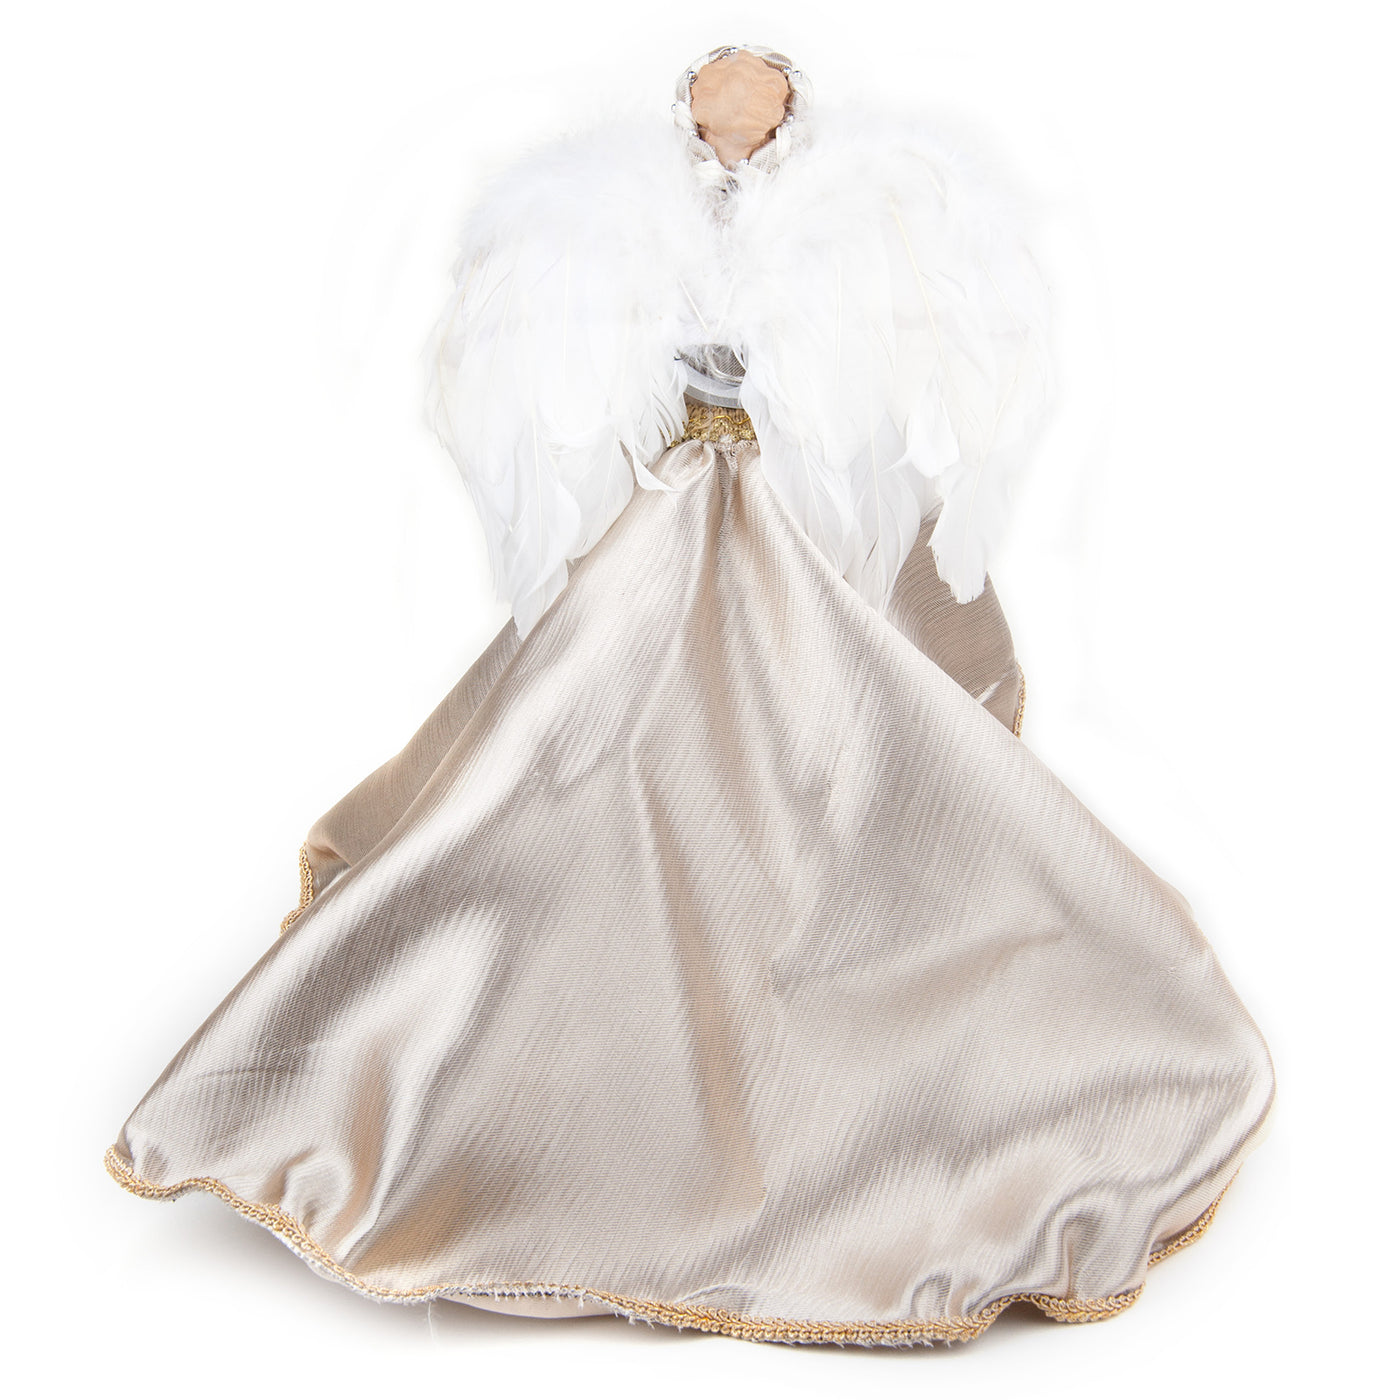 16" Tall Christmas Angel Décor with Light Up Wings 4 Styles Choices